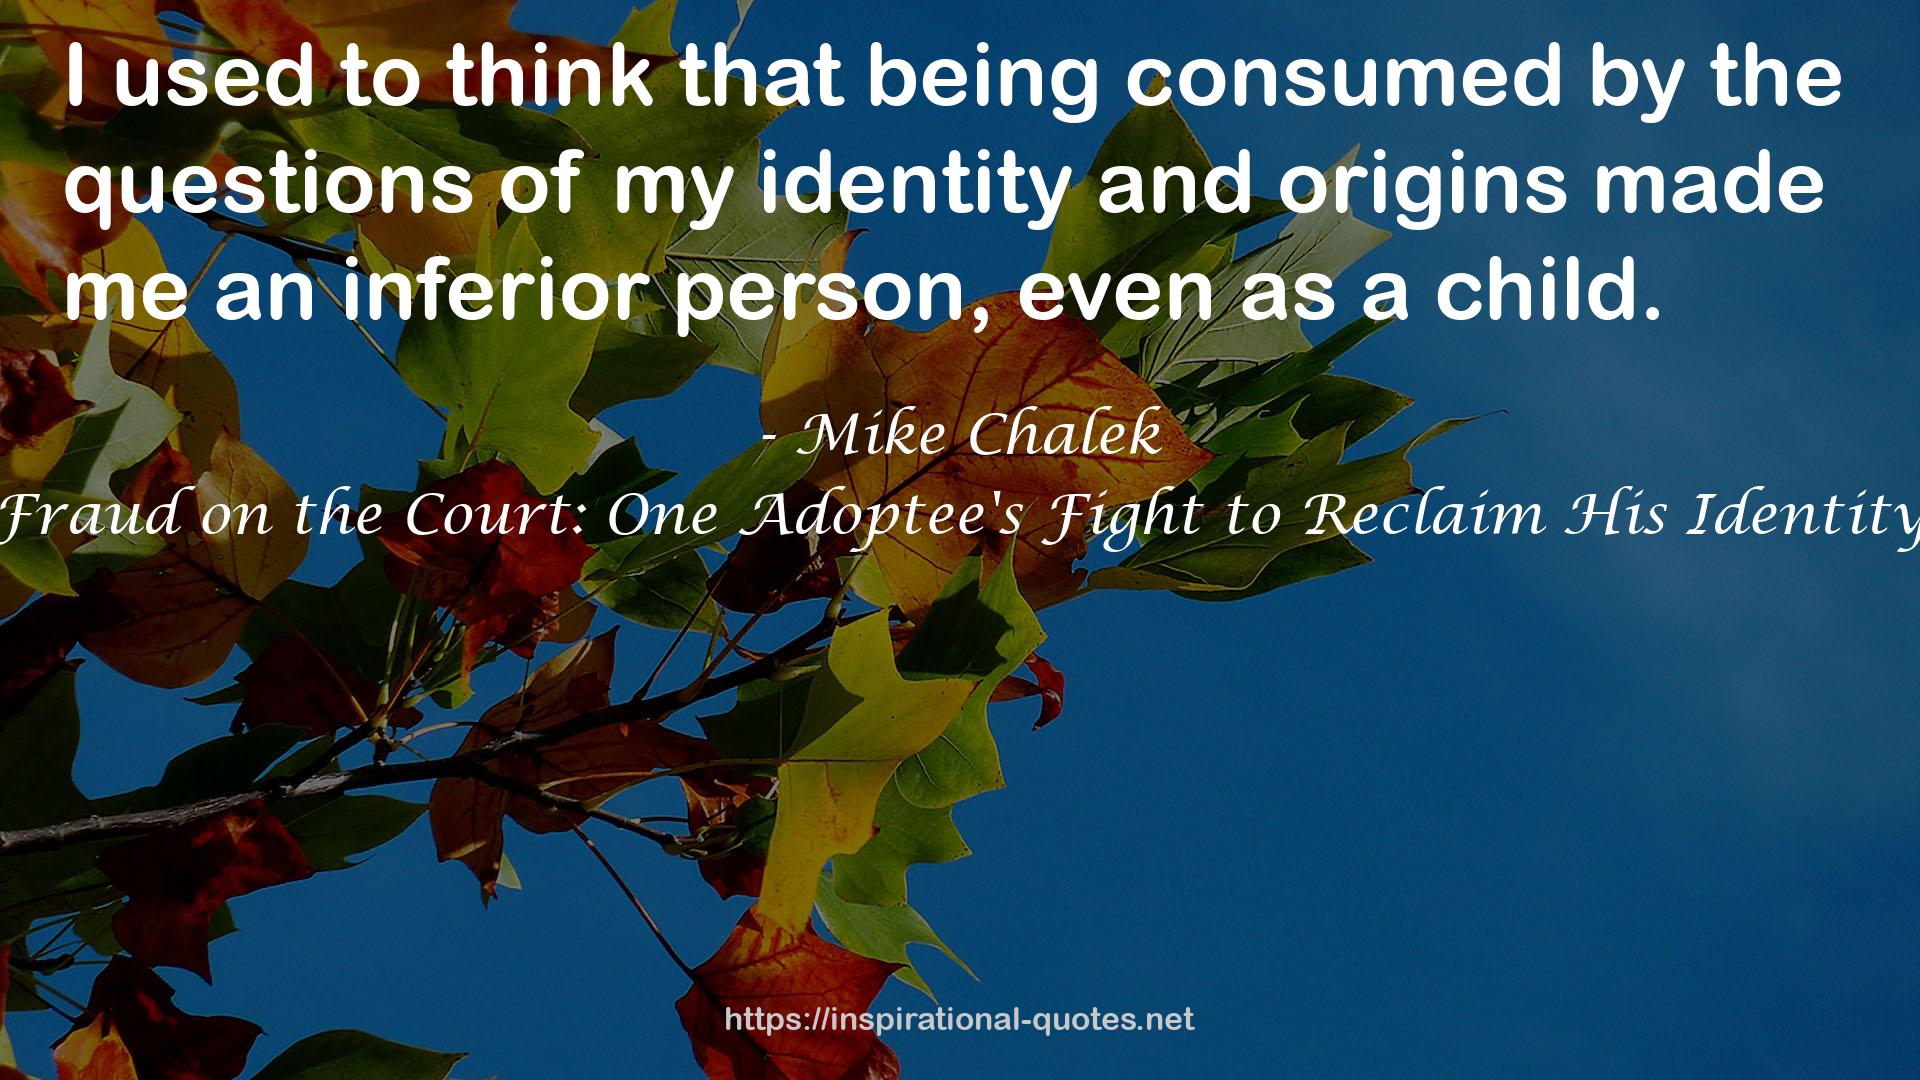 Fraud on the Court: One Adoptee's Fight to Reclaim His Identity QUOTES